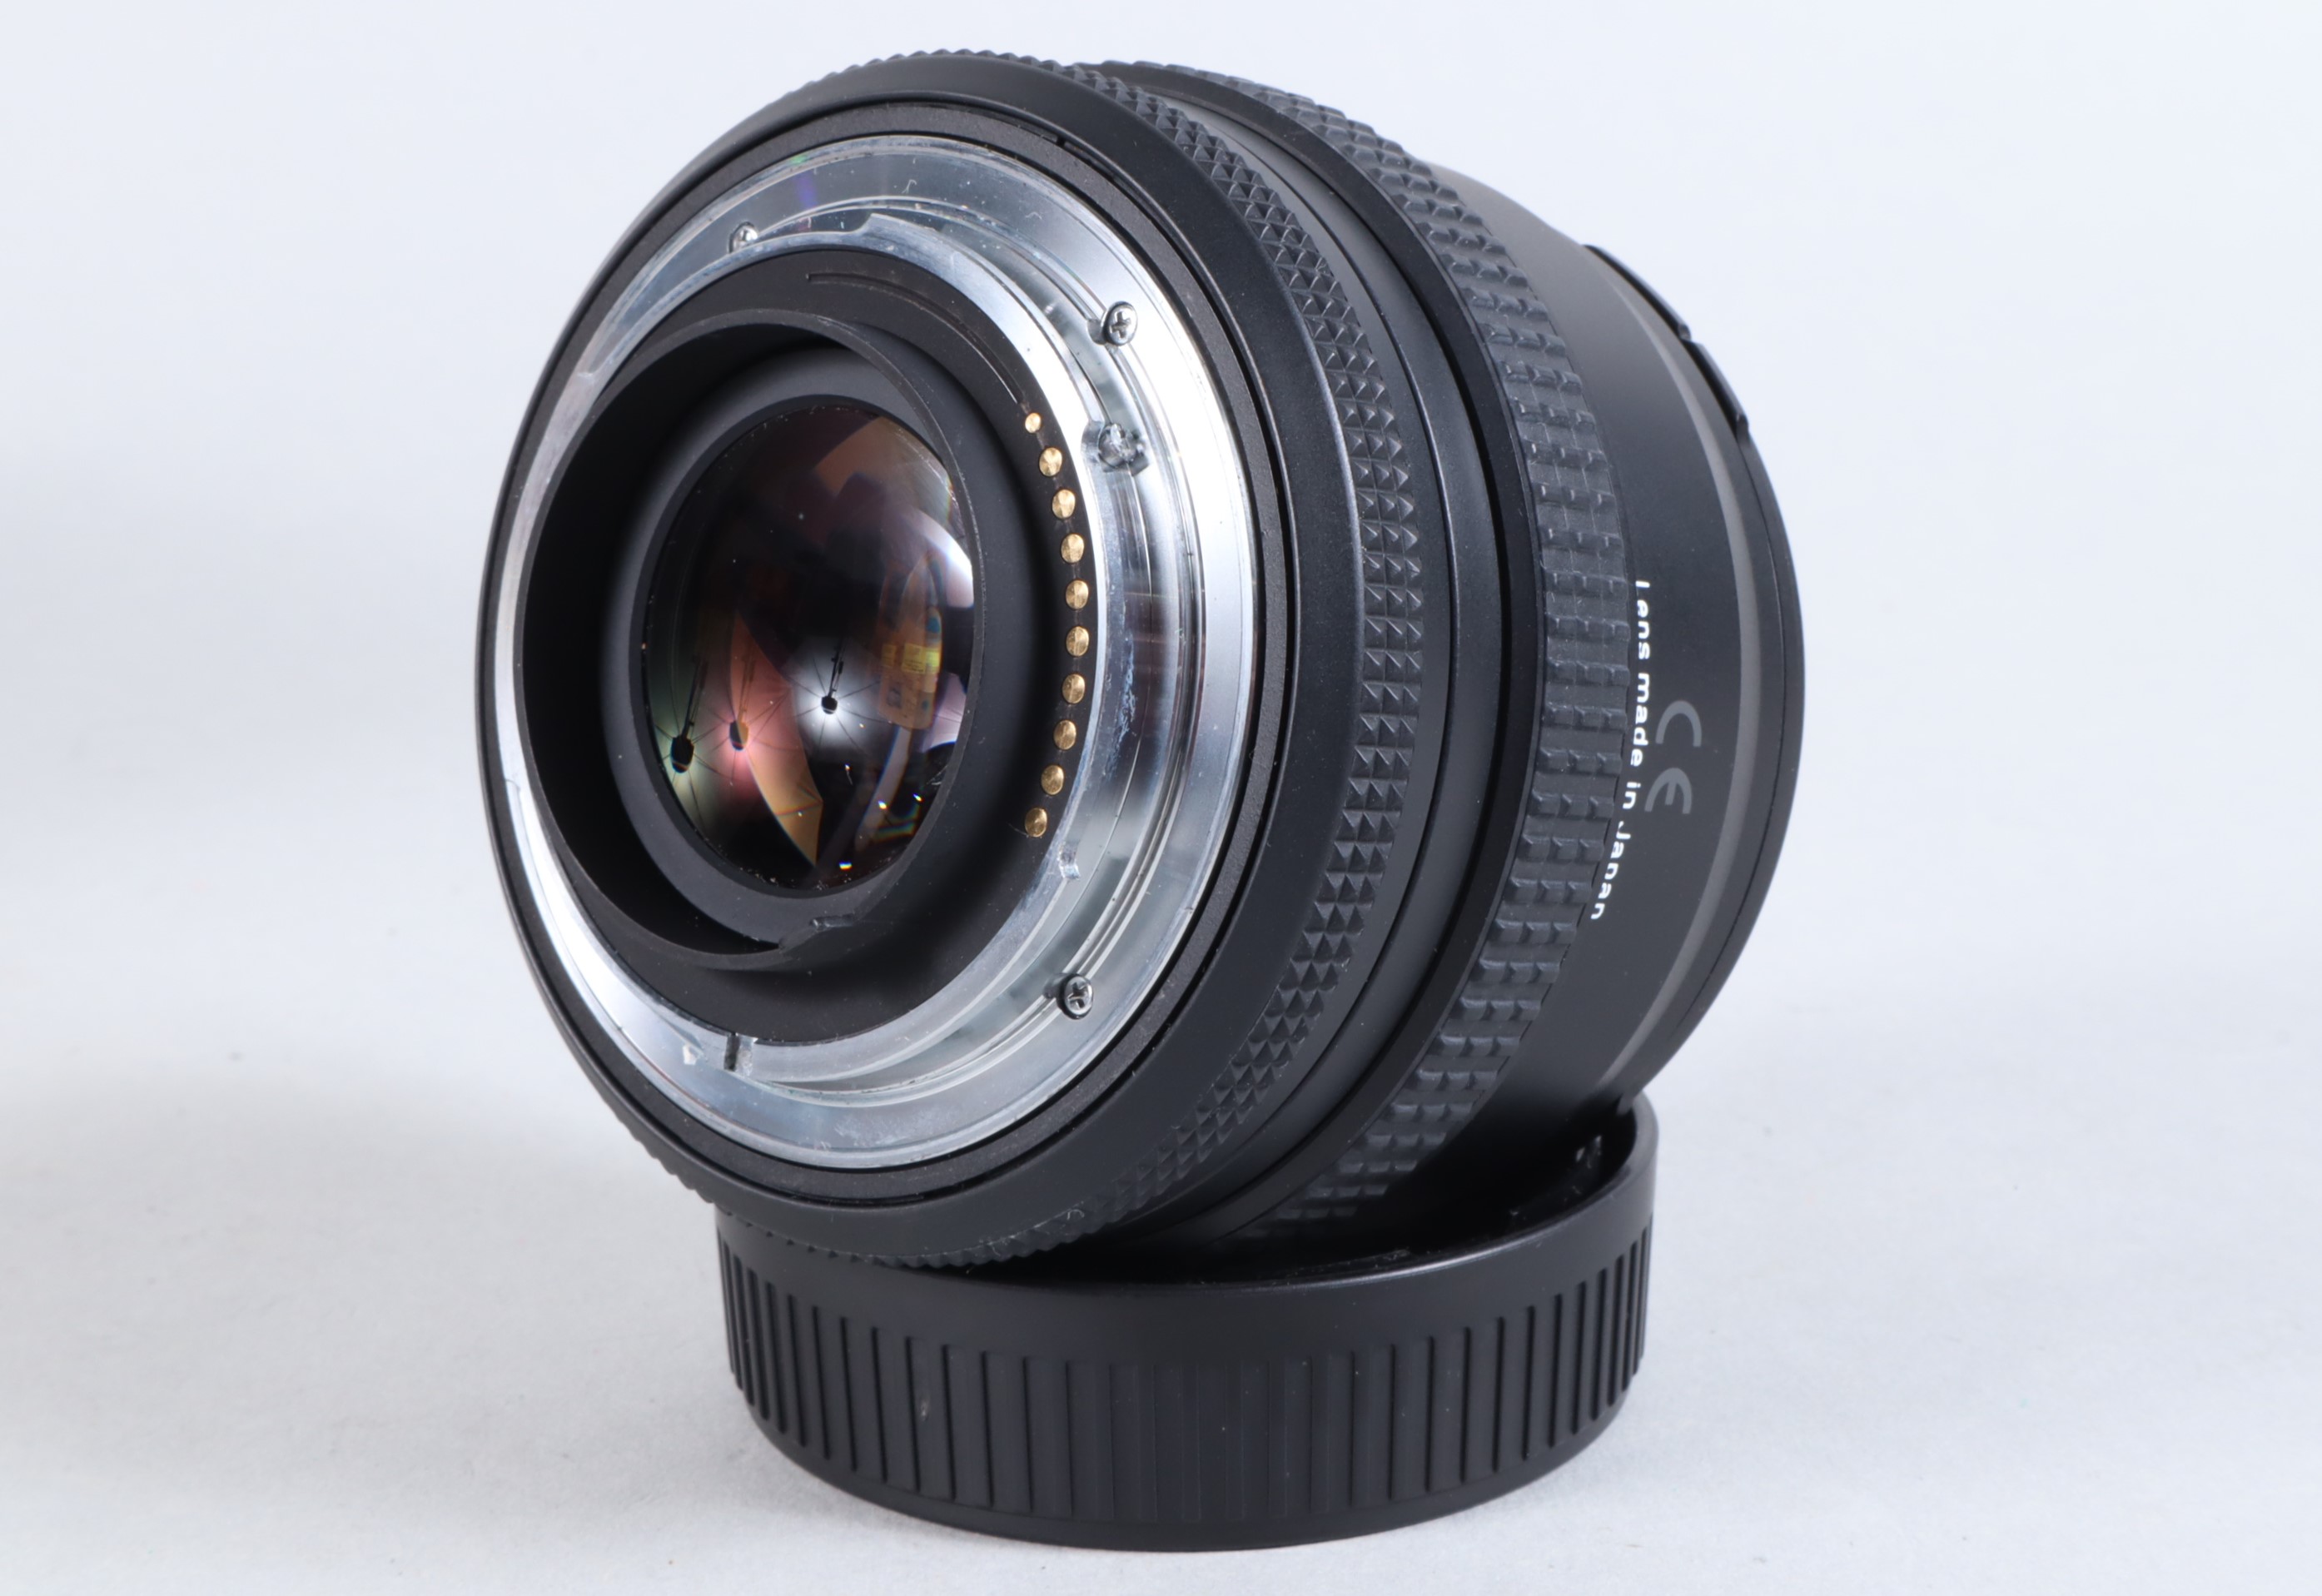 A Carl Zeiss T* 50mm f/1.4 Planar Lens, Contax N mount, serial no 12716963, barrel VG, elements G, - Image 4 of 4